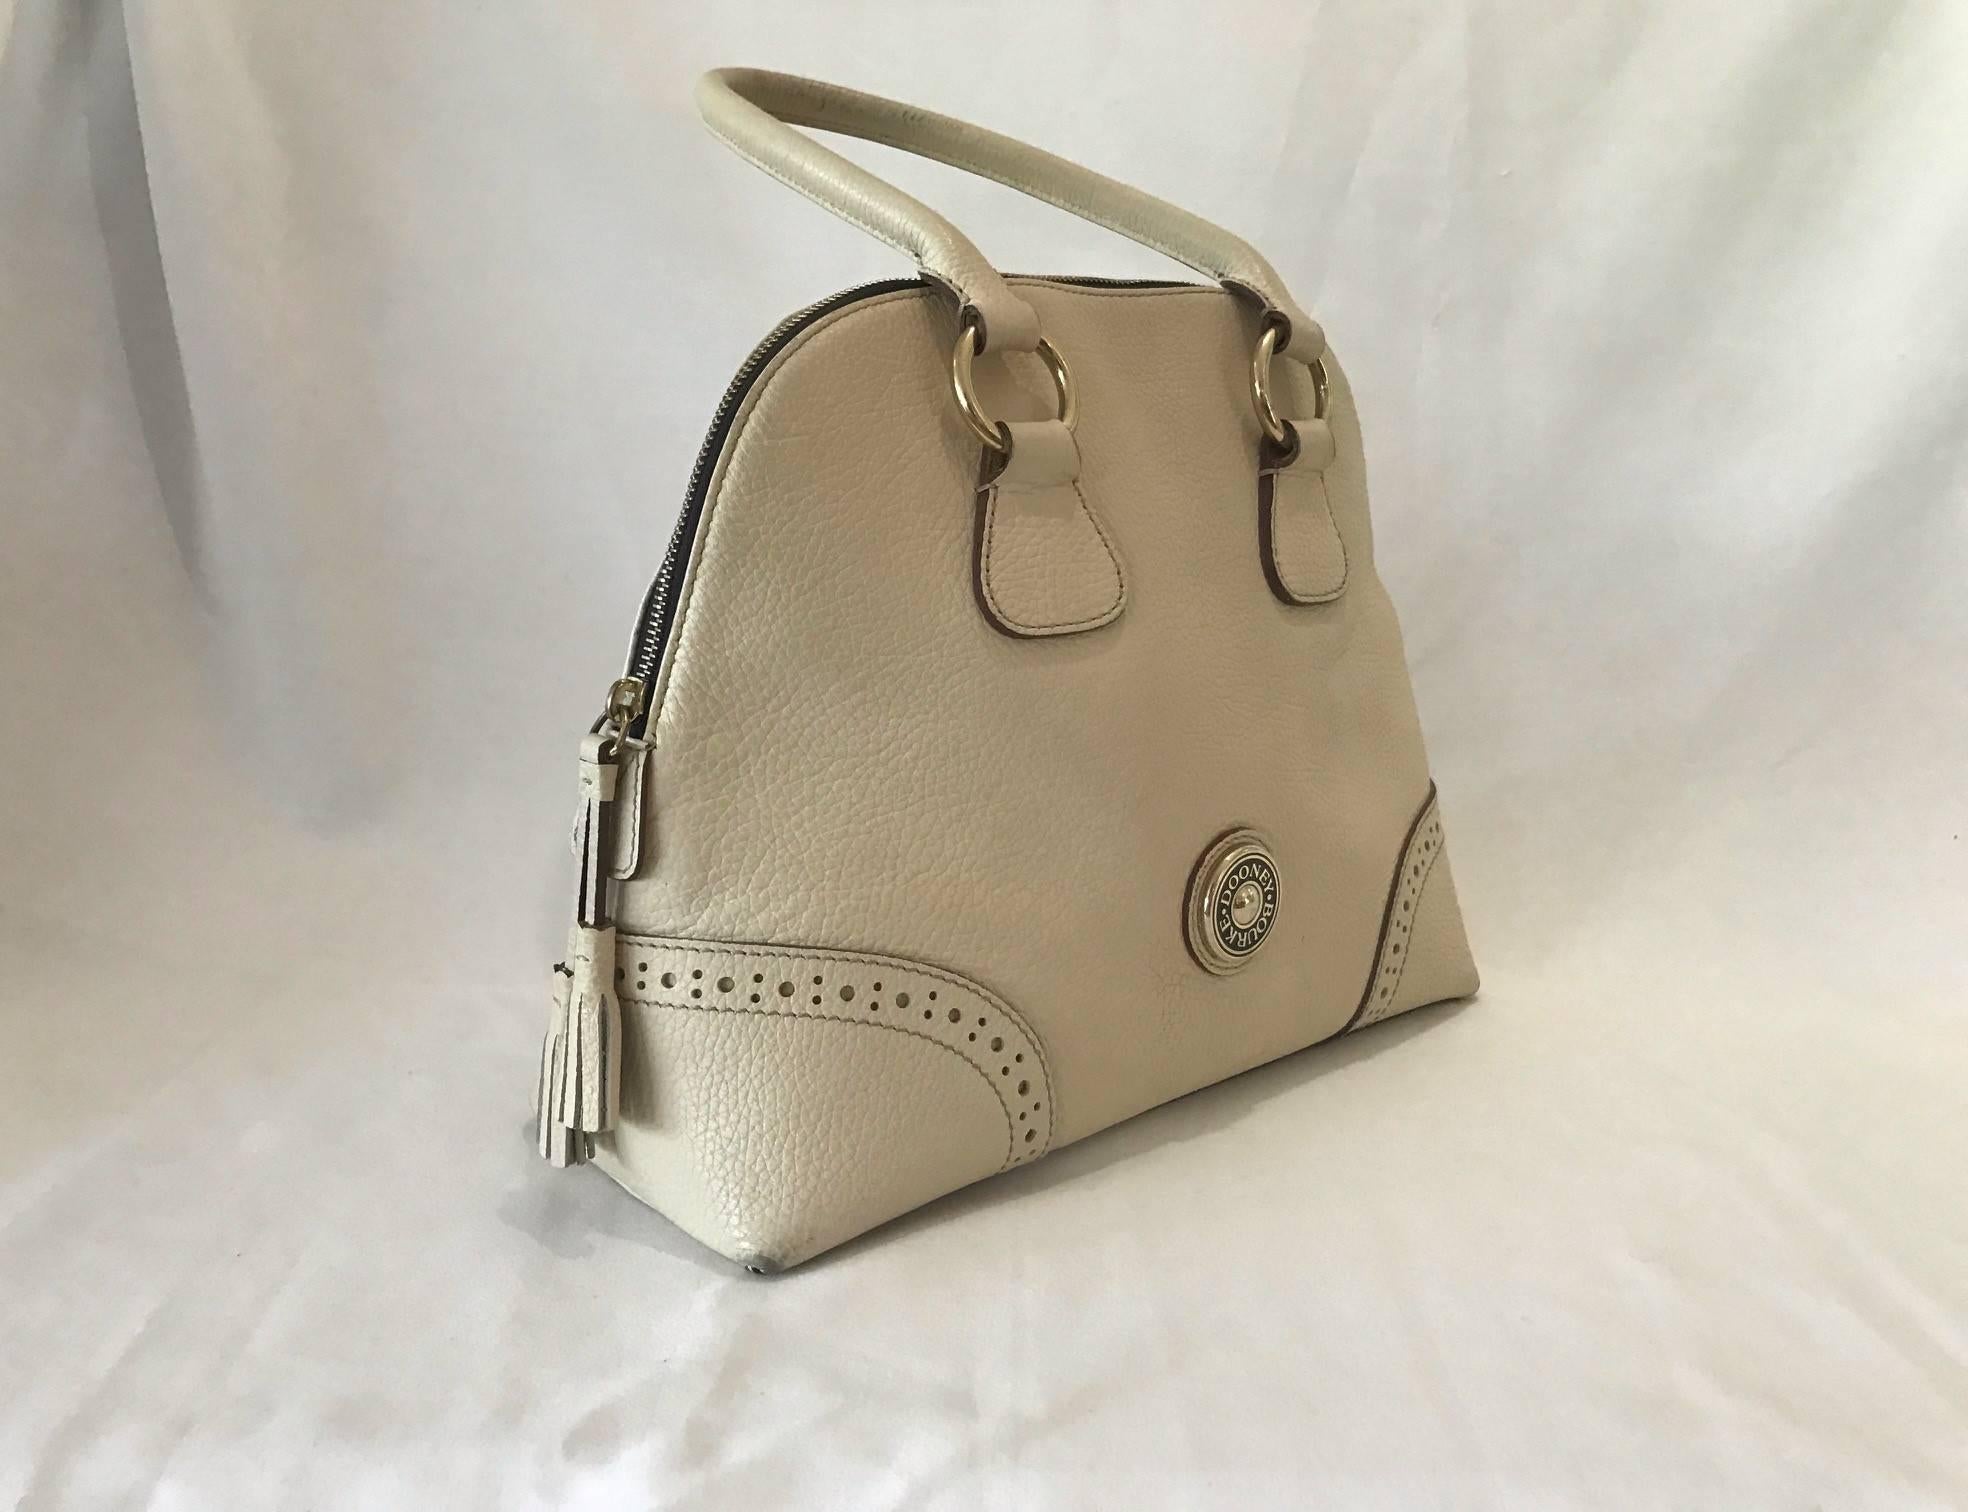 Authentic crème colored Dooney Bourke leather hand bag, clean, Rarely Used. Soft Salmon Tweed Interior. Like New.